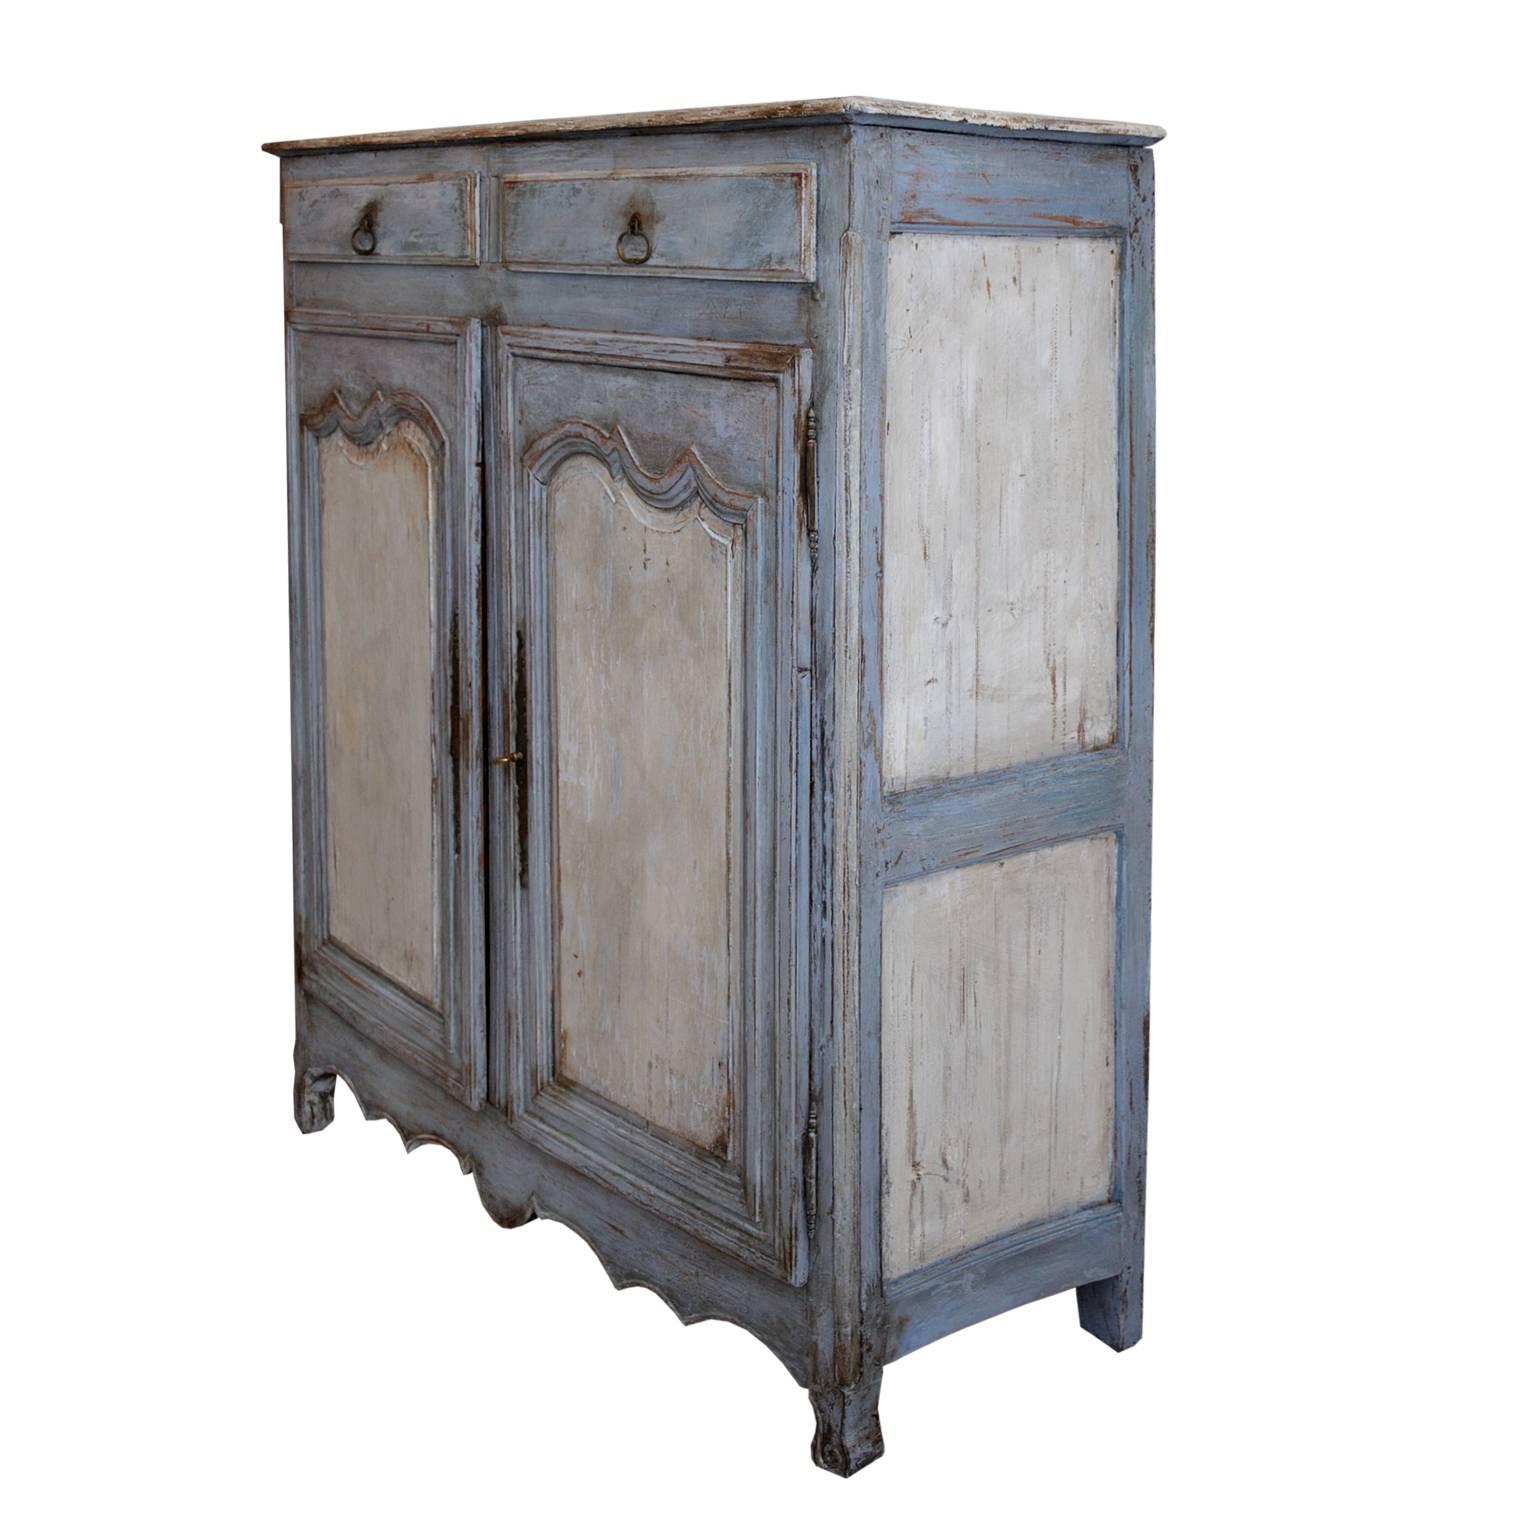 This is a rather lovely mid-18th century Louis XV small painted cupboard armoire of very practical dimensions.

The cupboard has two internal shelves, these can be removed to create a large open cupboard and use the internal brass hanging rail,